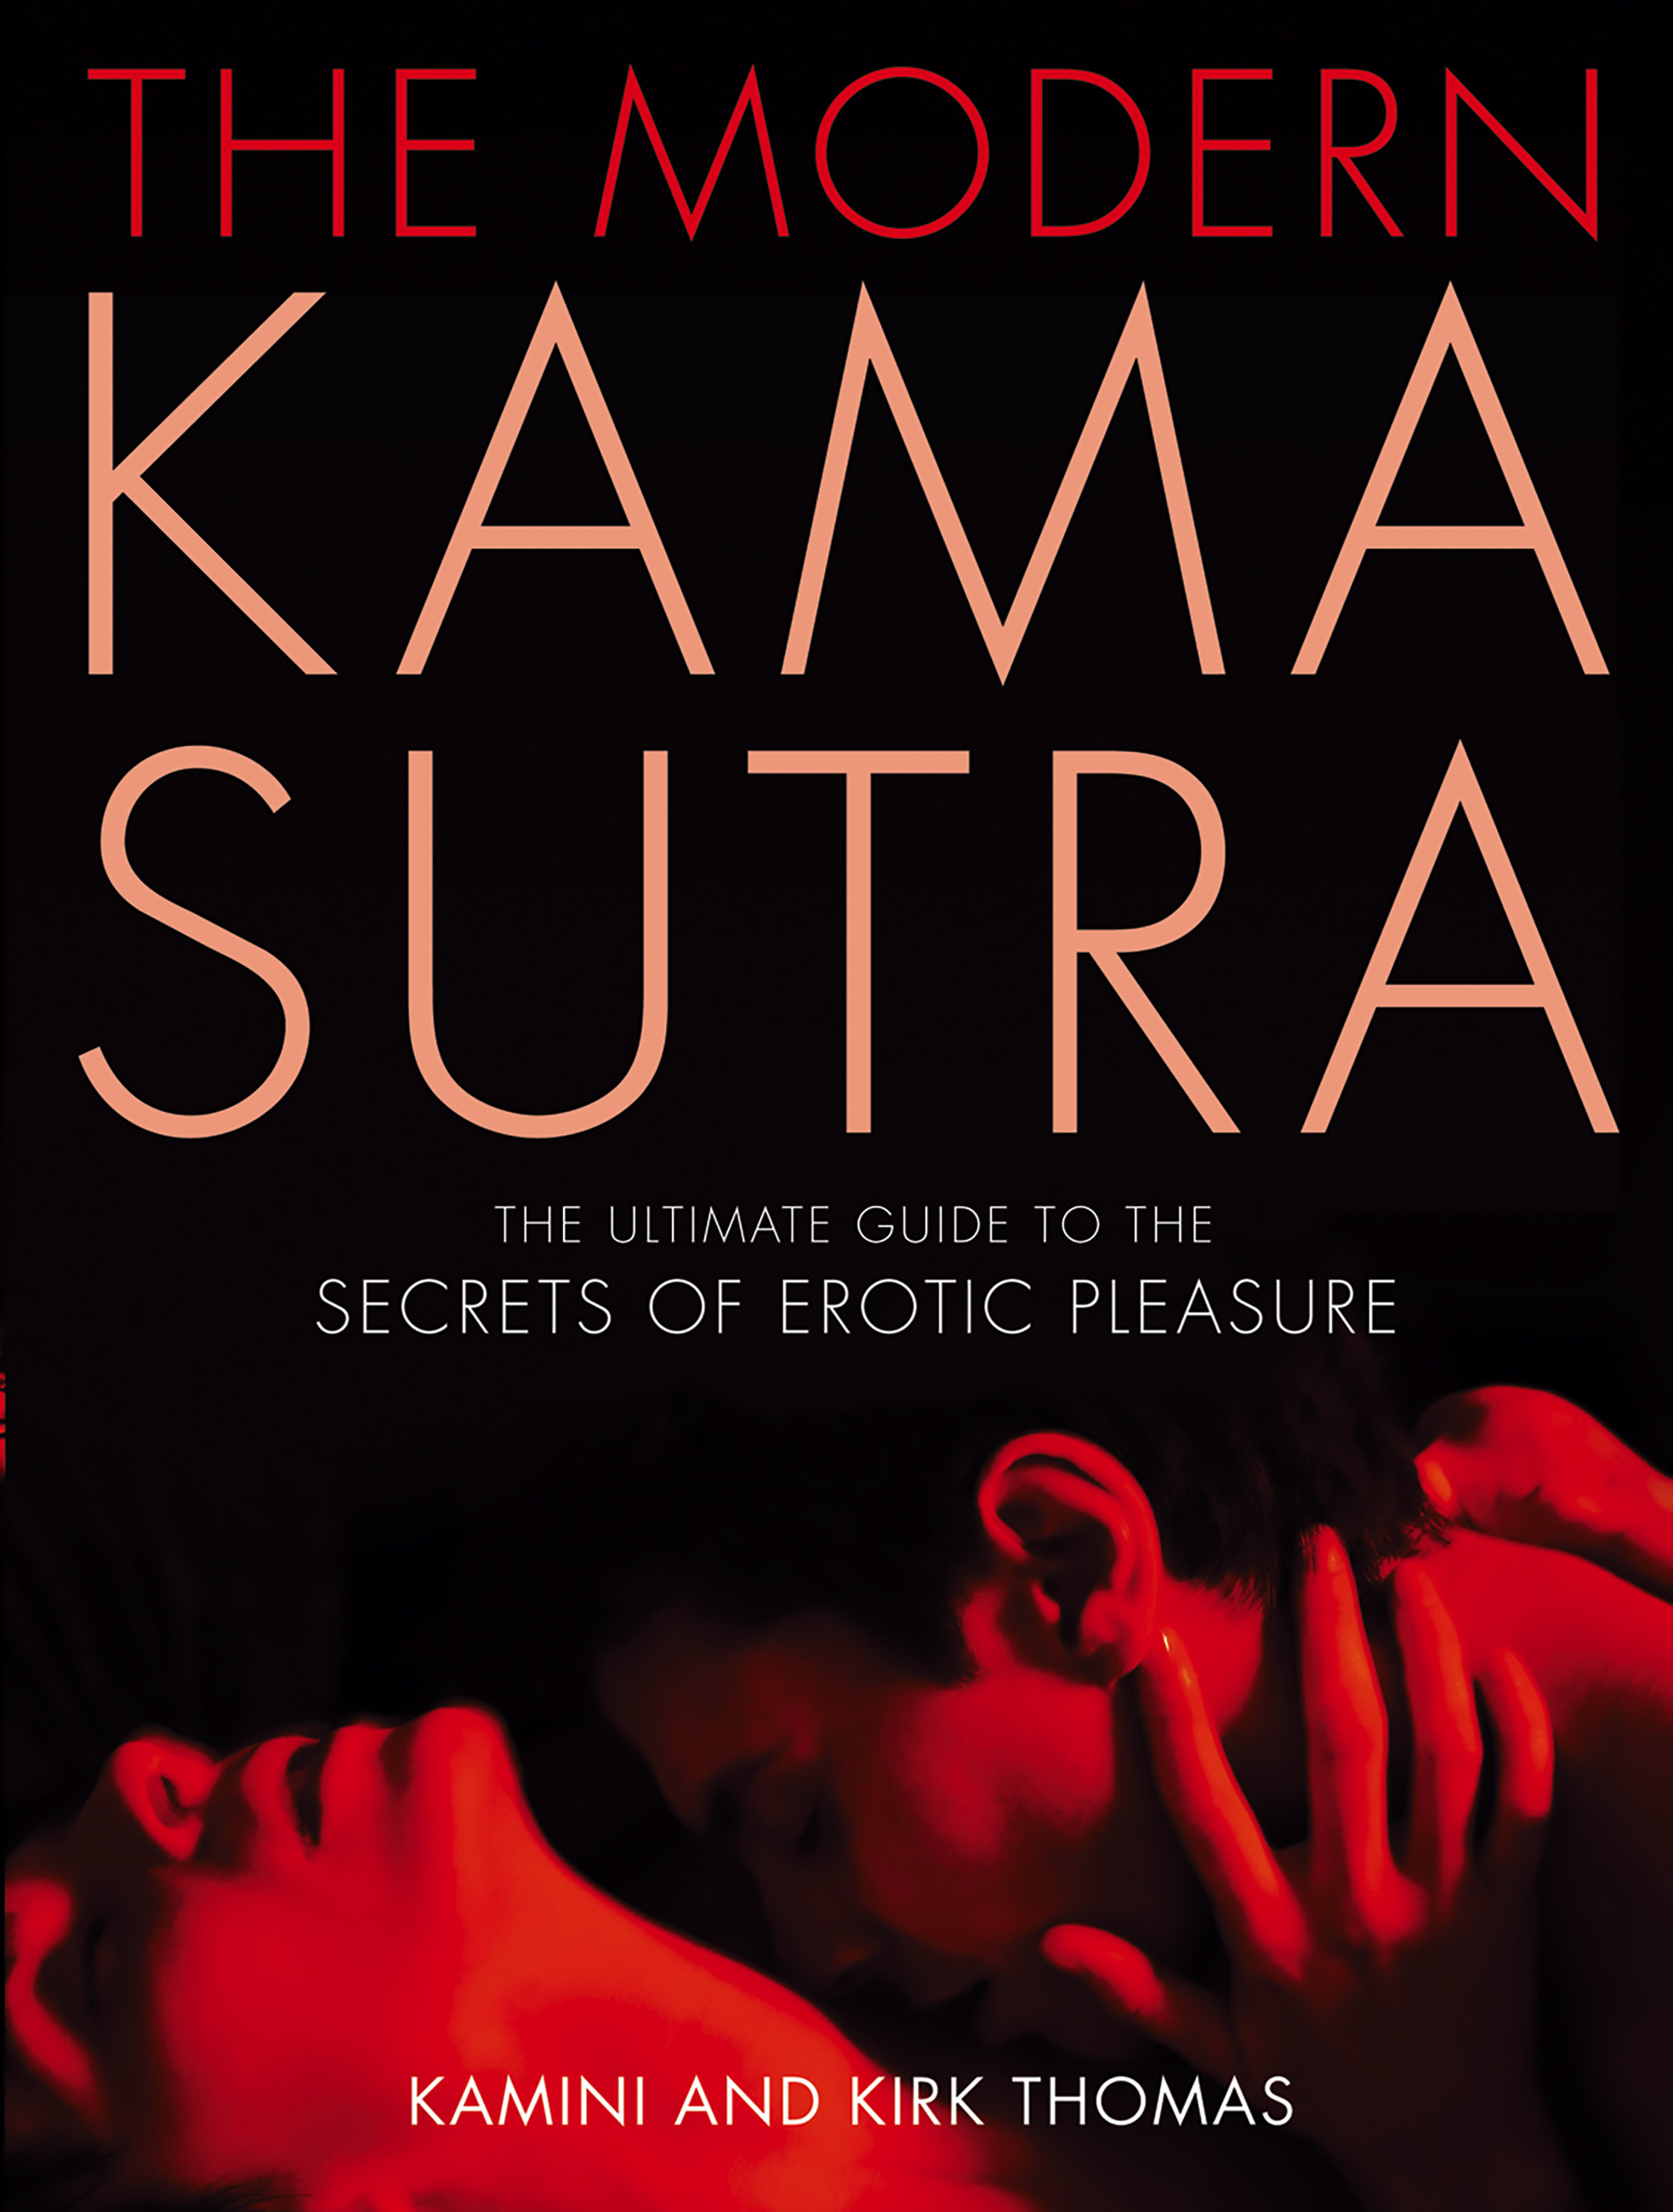 karma sutra pictures